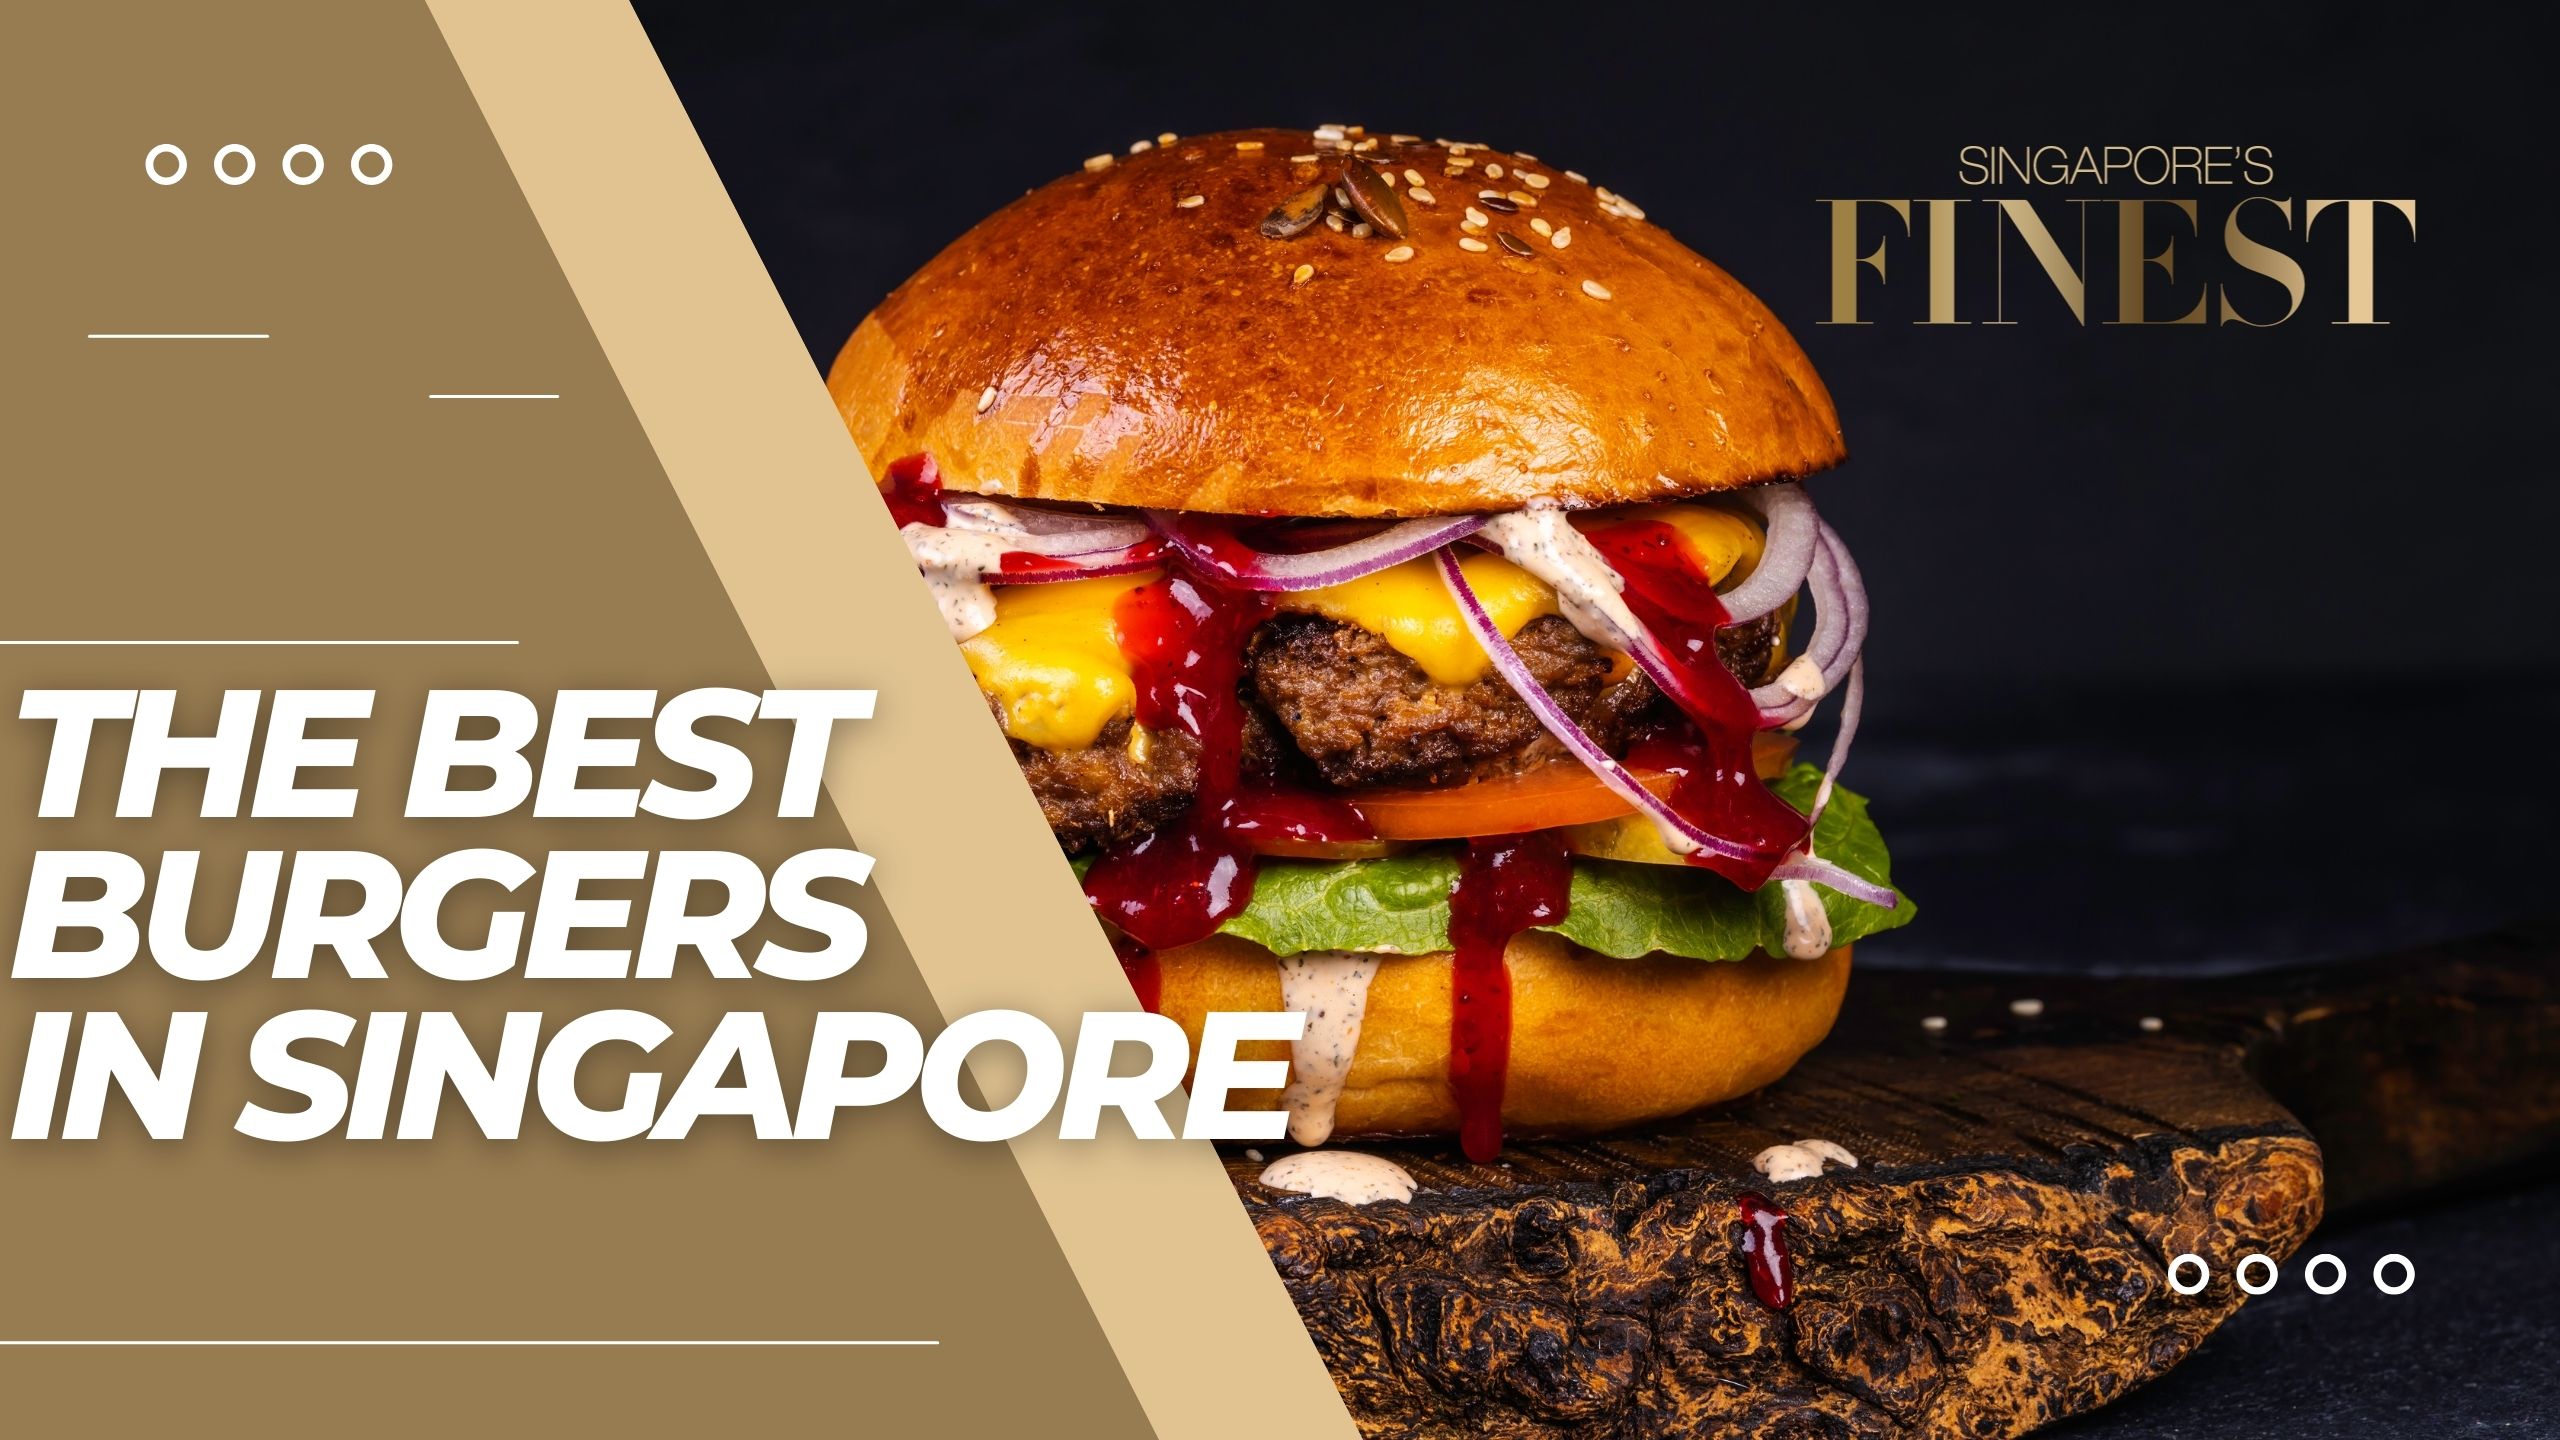 The Finest Burgers in Singapore